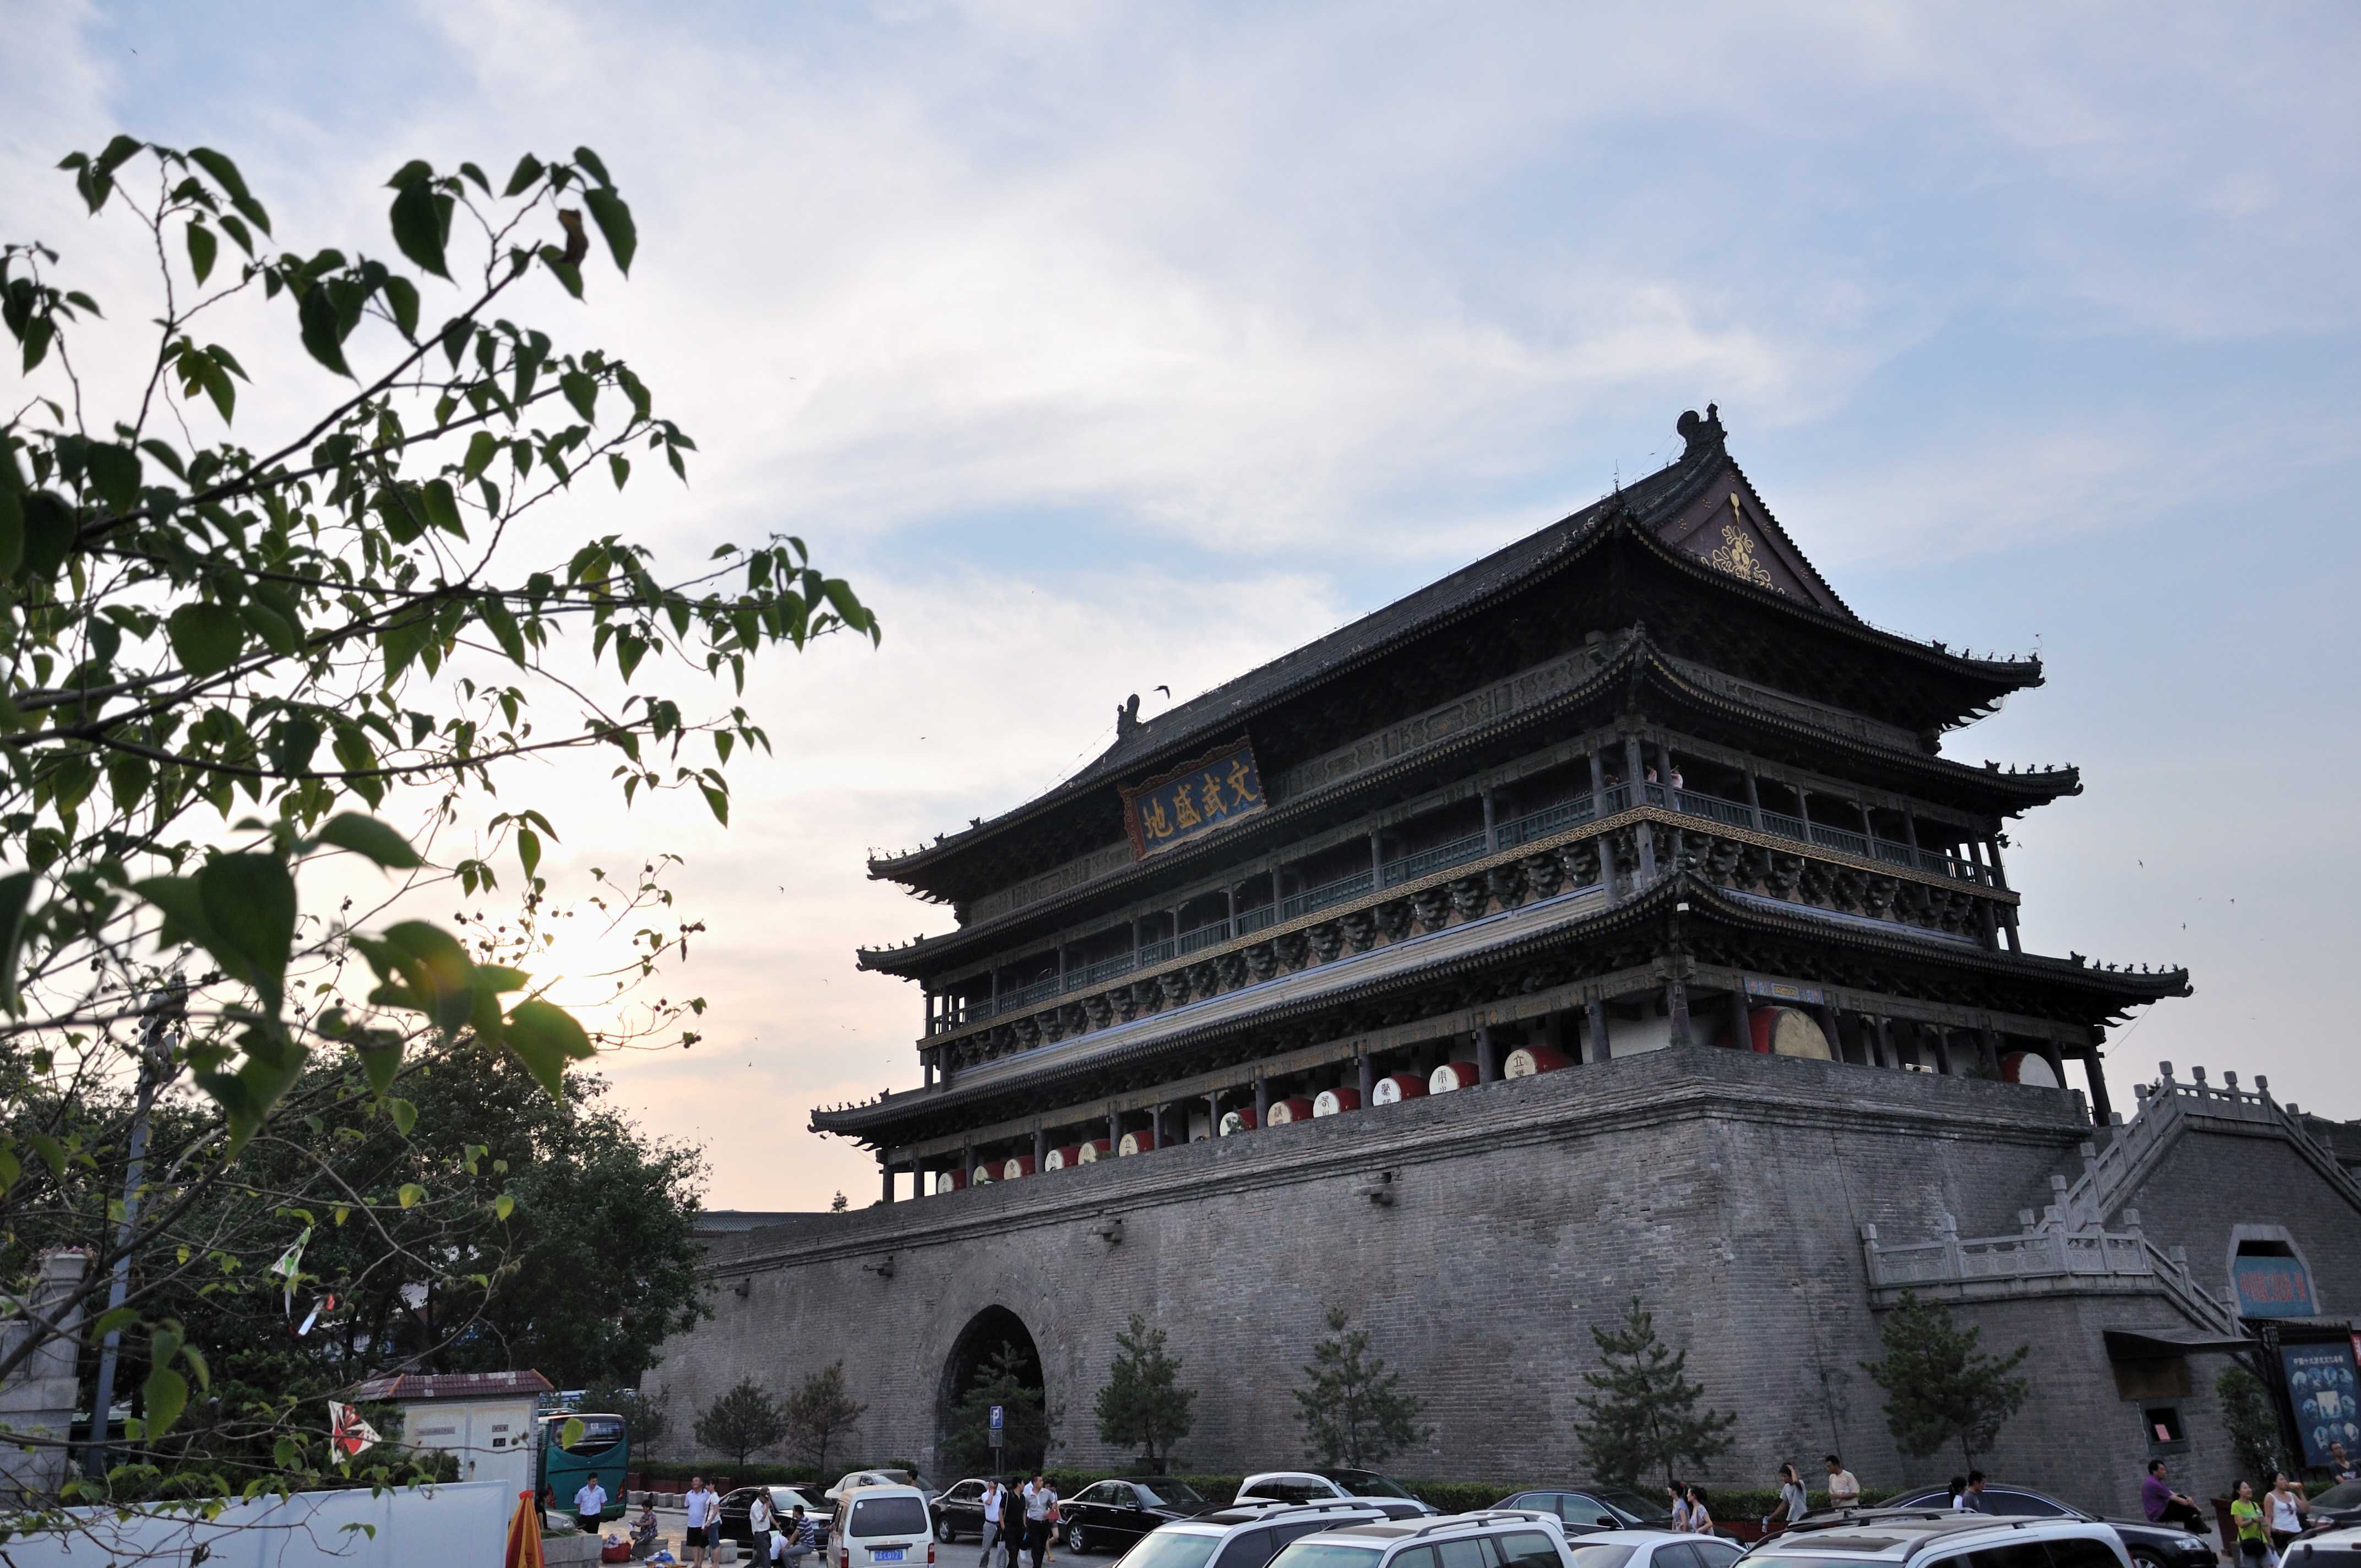 The_Drum_Tower_of_Xi-an